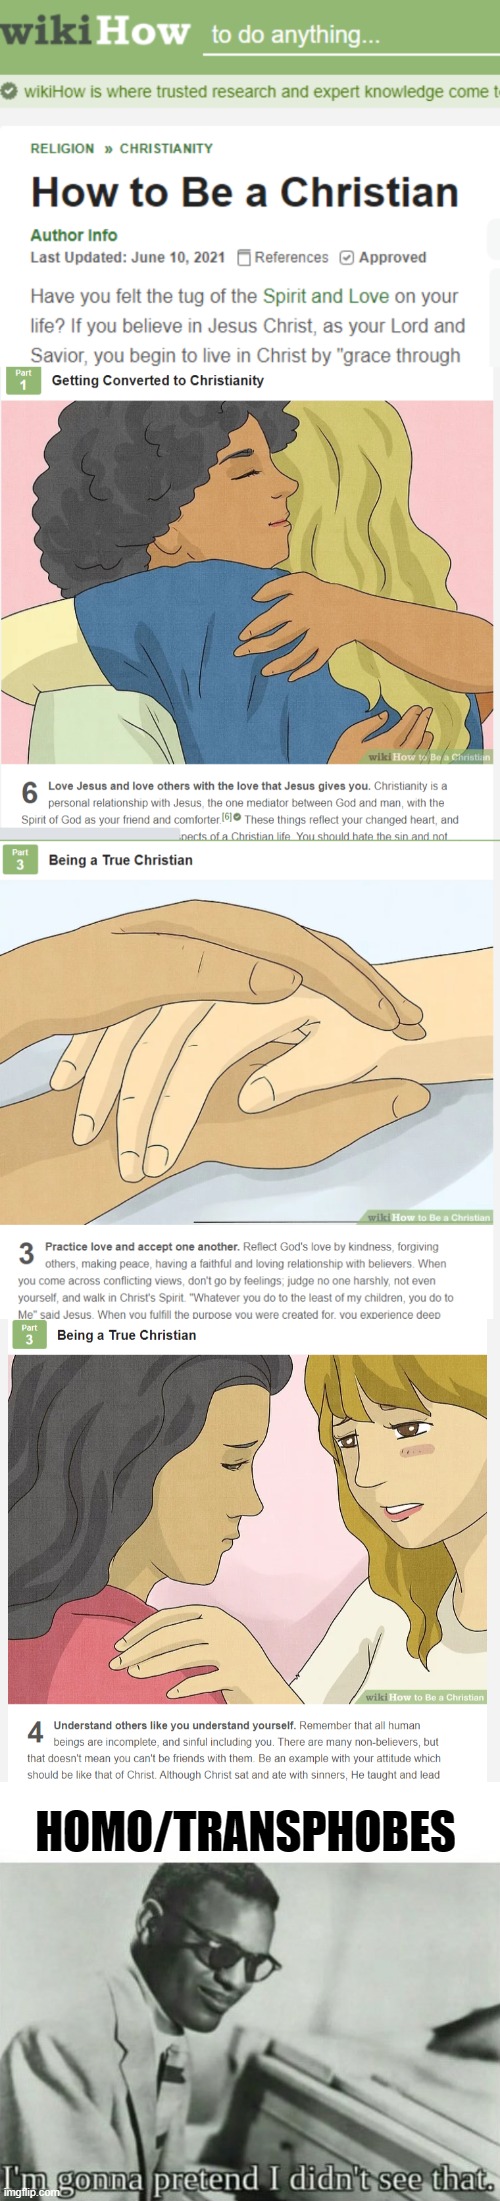 Next time I see a "Christian" being a homophobe, I ain't gonna believe 'em for a second! | HOMO/TRANSPHOBES | image tagged in i'm gonna pretend i didn't see that,homophobe,transphobic,christianity,memes,wikihow | made w/ Imgflip meme maker